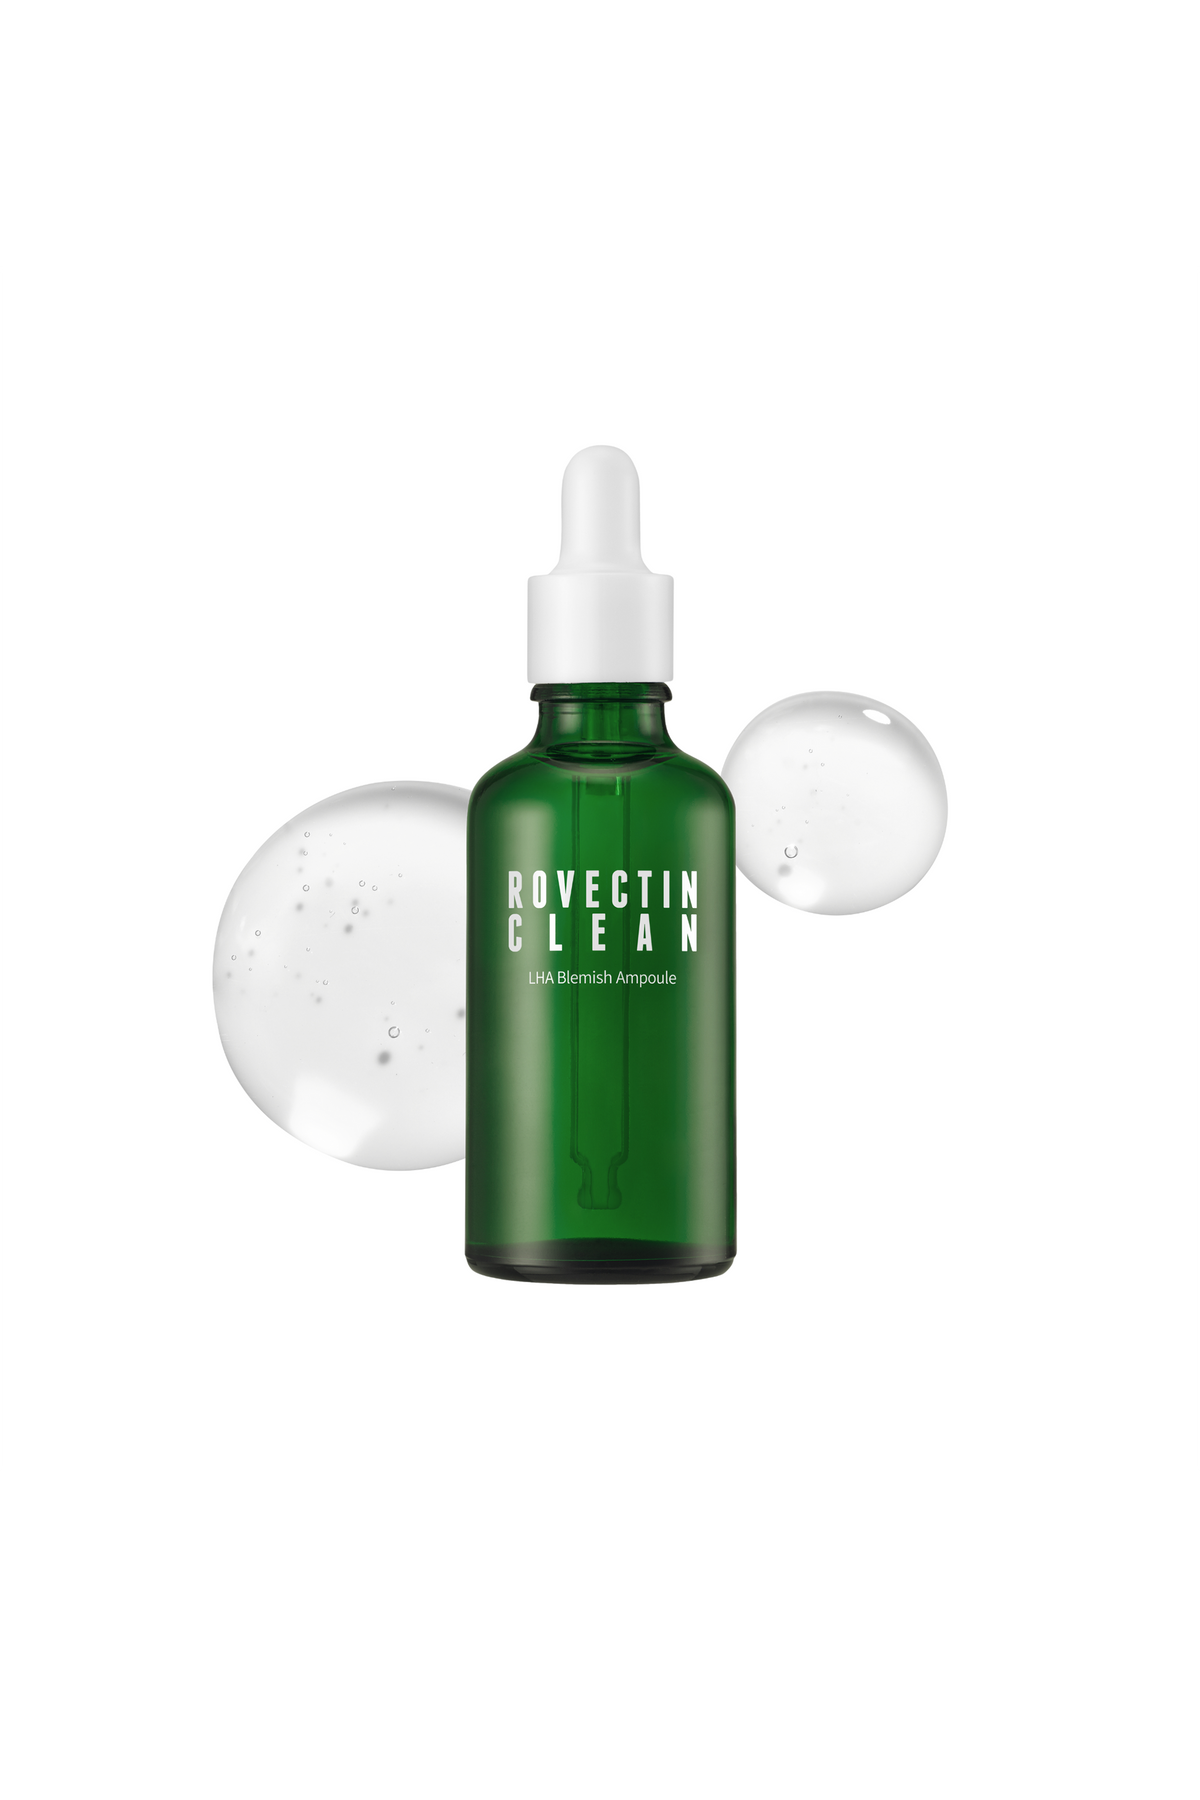 LHA Blemish Ampoule by Rovectin Skin Essentials